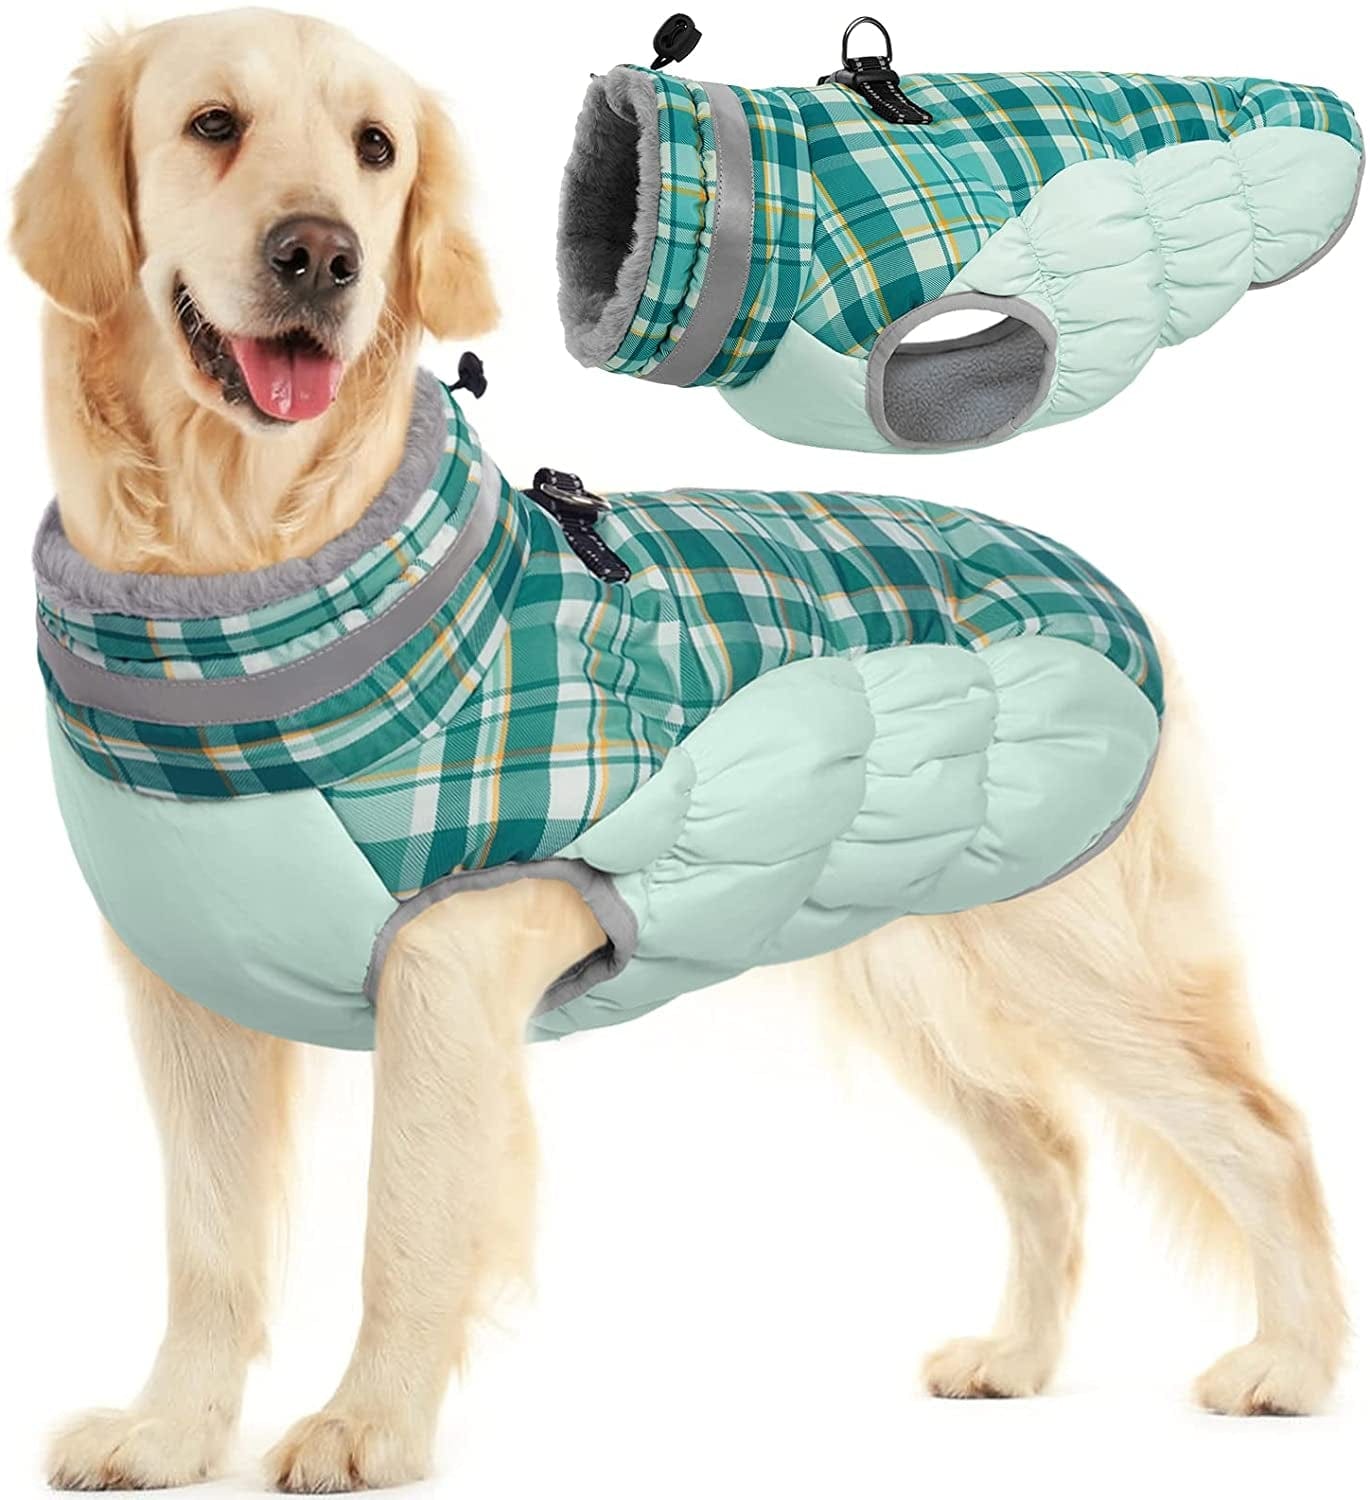 FUAMEY Dog Winter Jacket,Dog Cold Weather Coats Paded Dog Vest Warm Zip up Dog Windproof Apparel Pet Fleece Lined Outfit for Small Medium Large Dogs with Harness Cozy Dog Clothes with Fur Collar